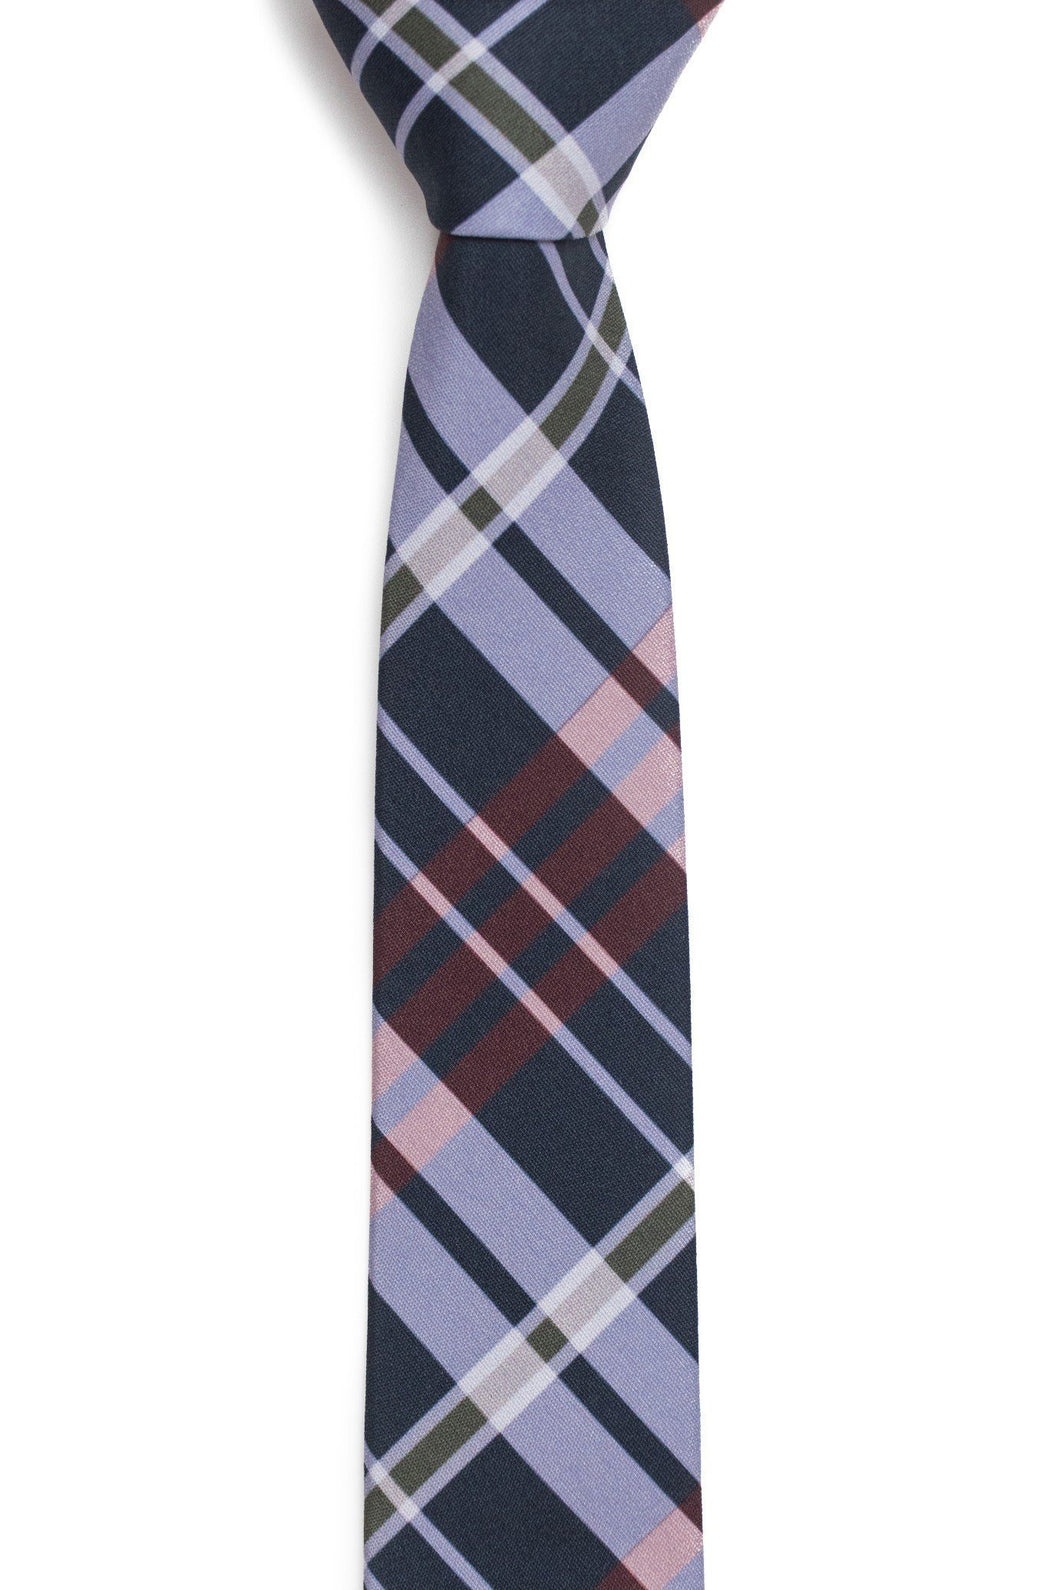 Kevin missionary tie